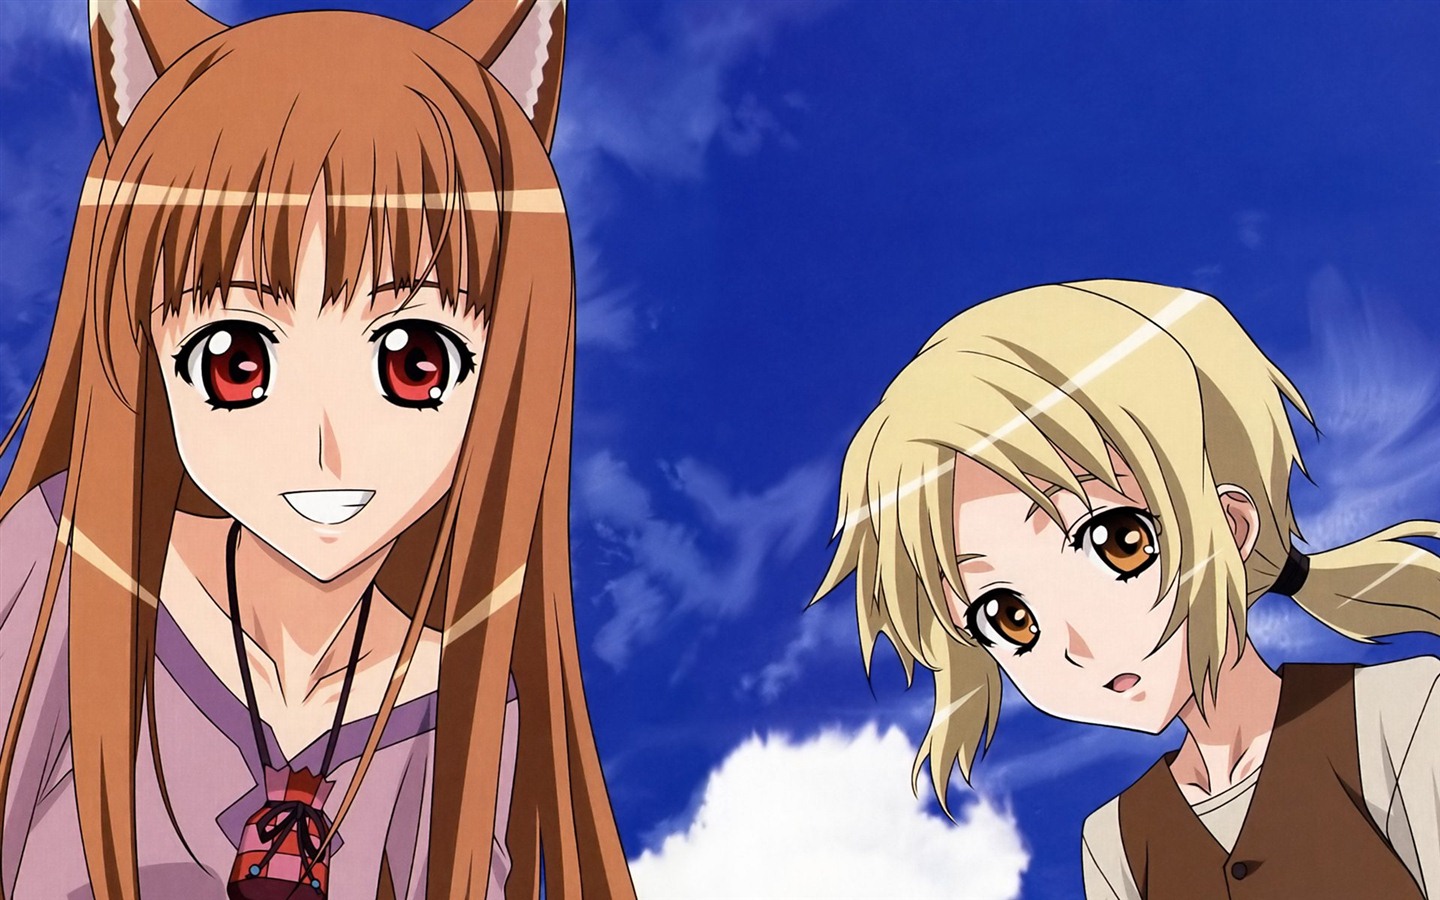 Spice and Wolf HD wallpapers #25 - 1440x900